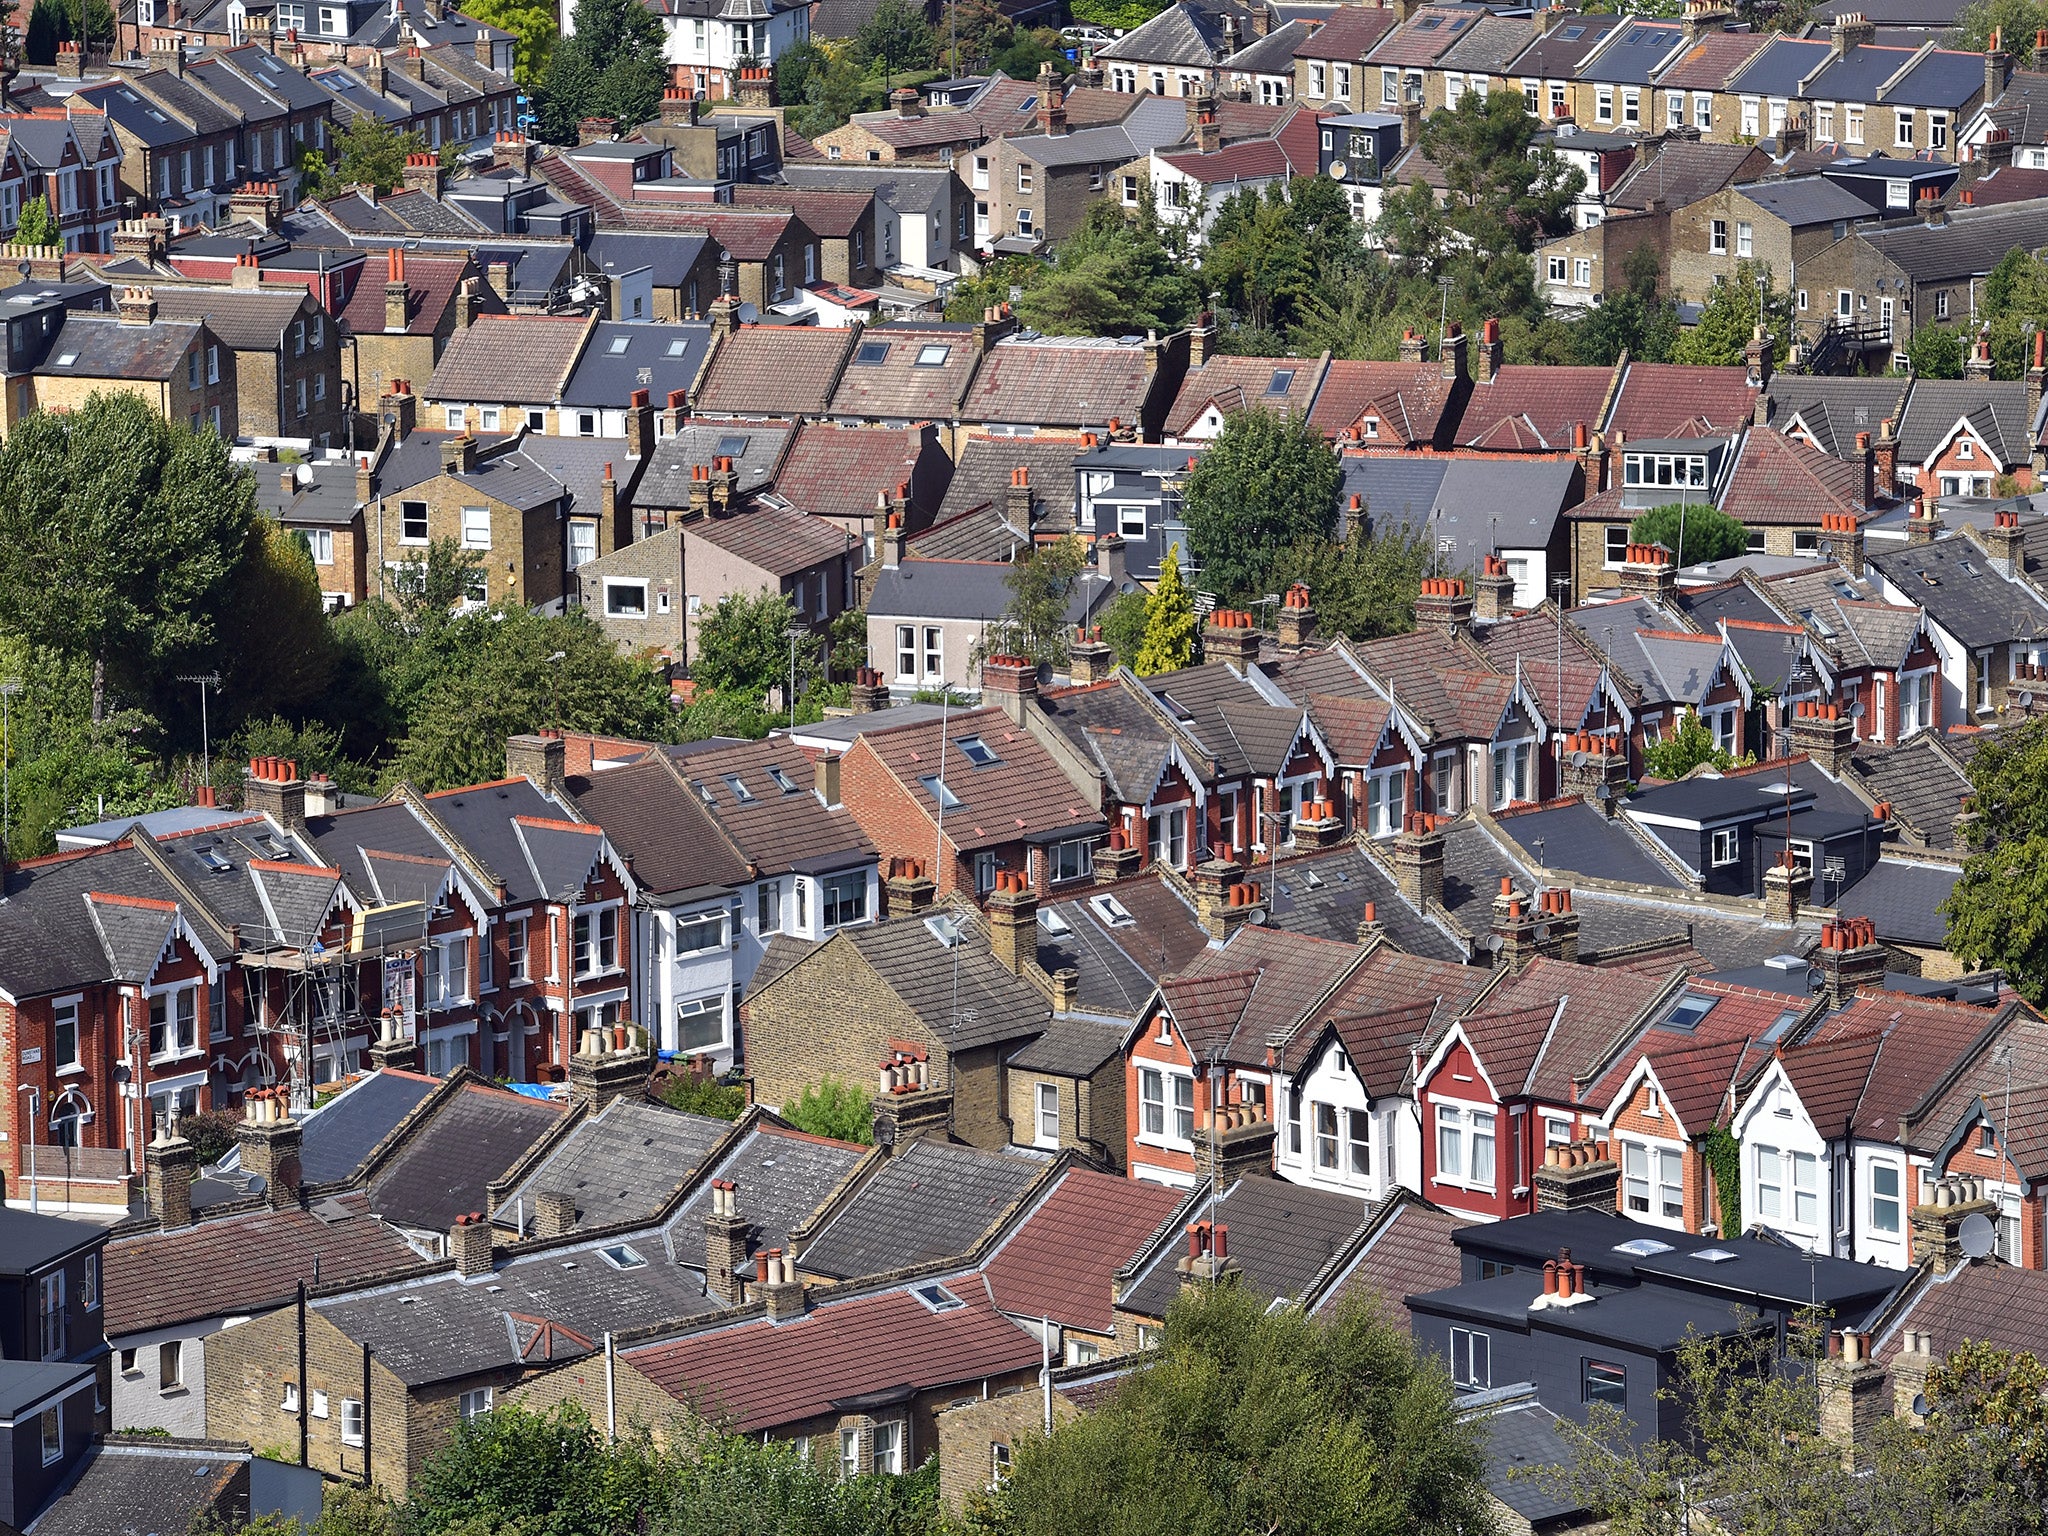 More than 30 per cent of London renters pay at least 50 per cent of their income on rent